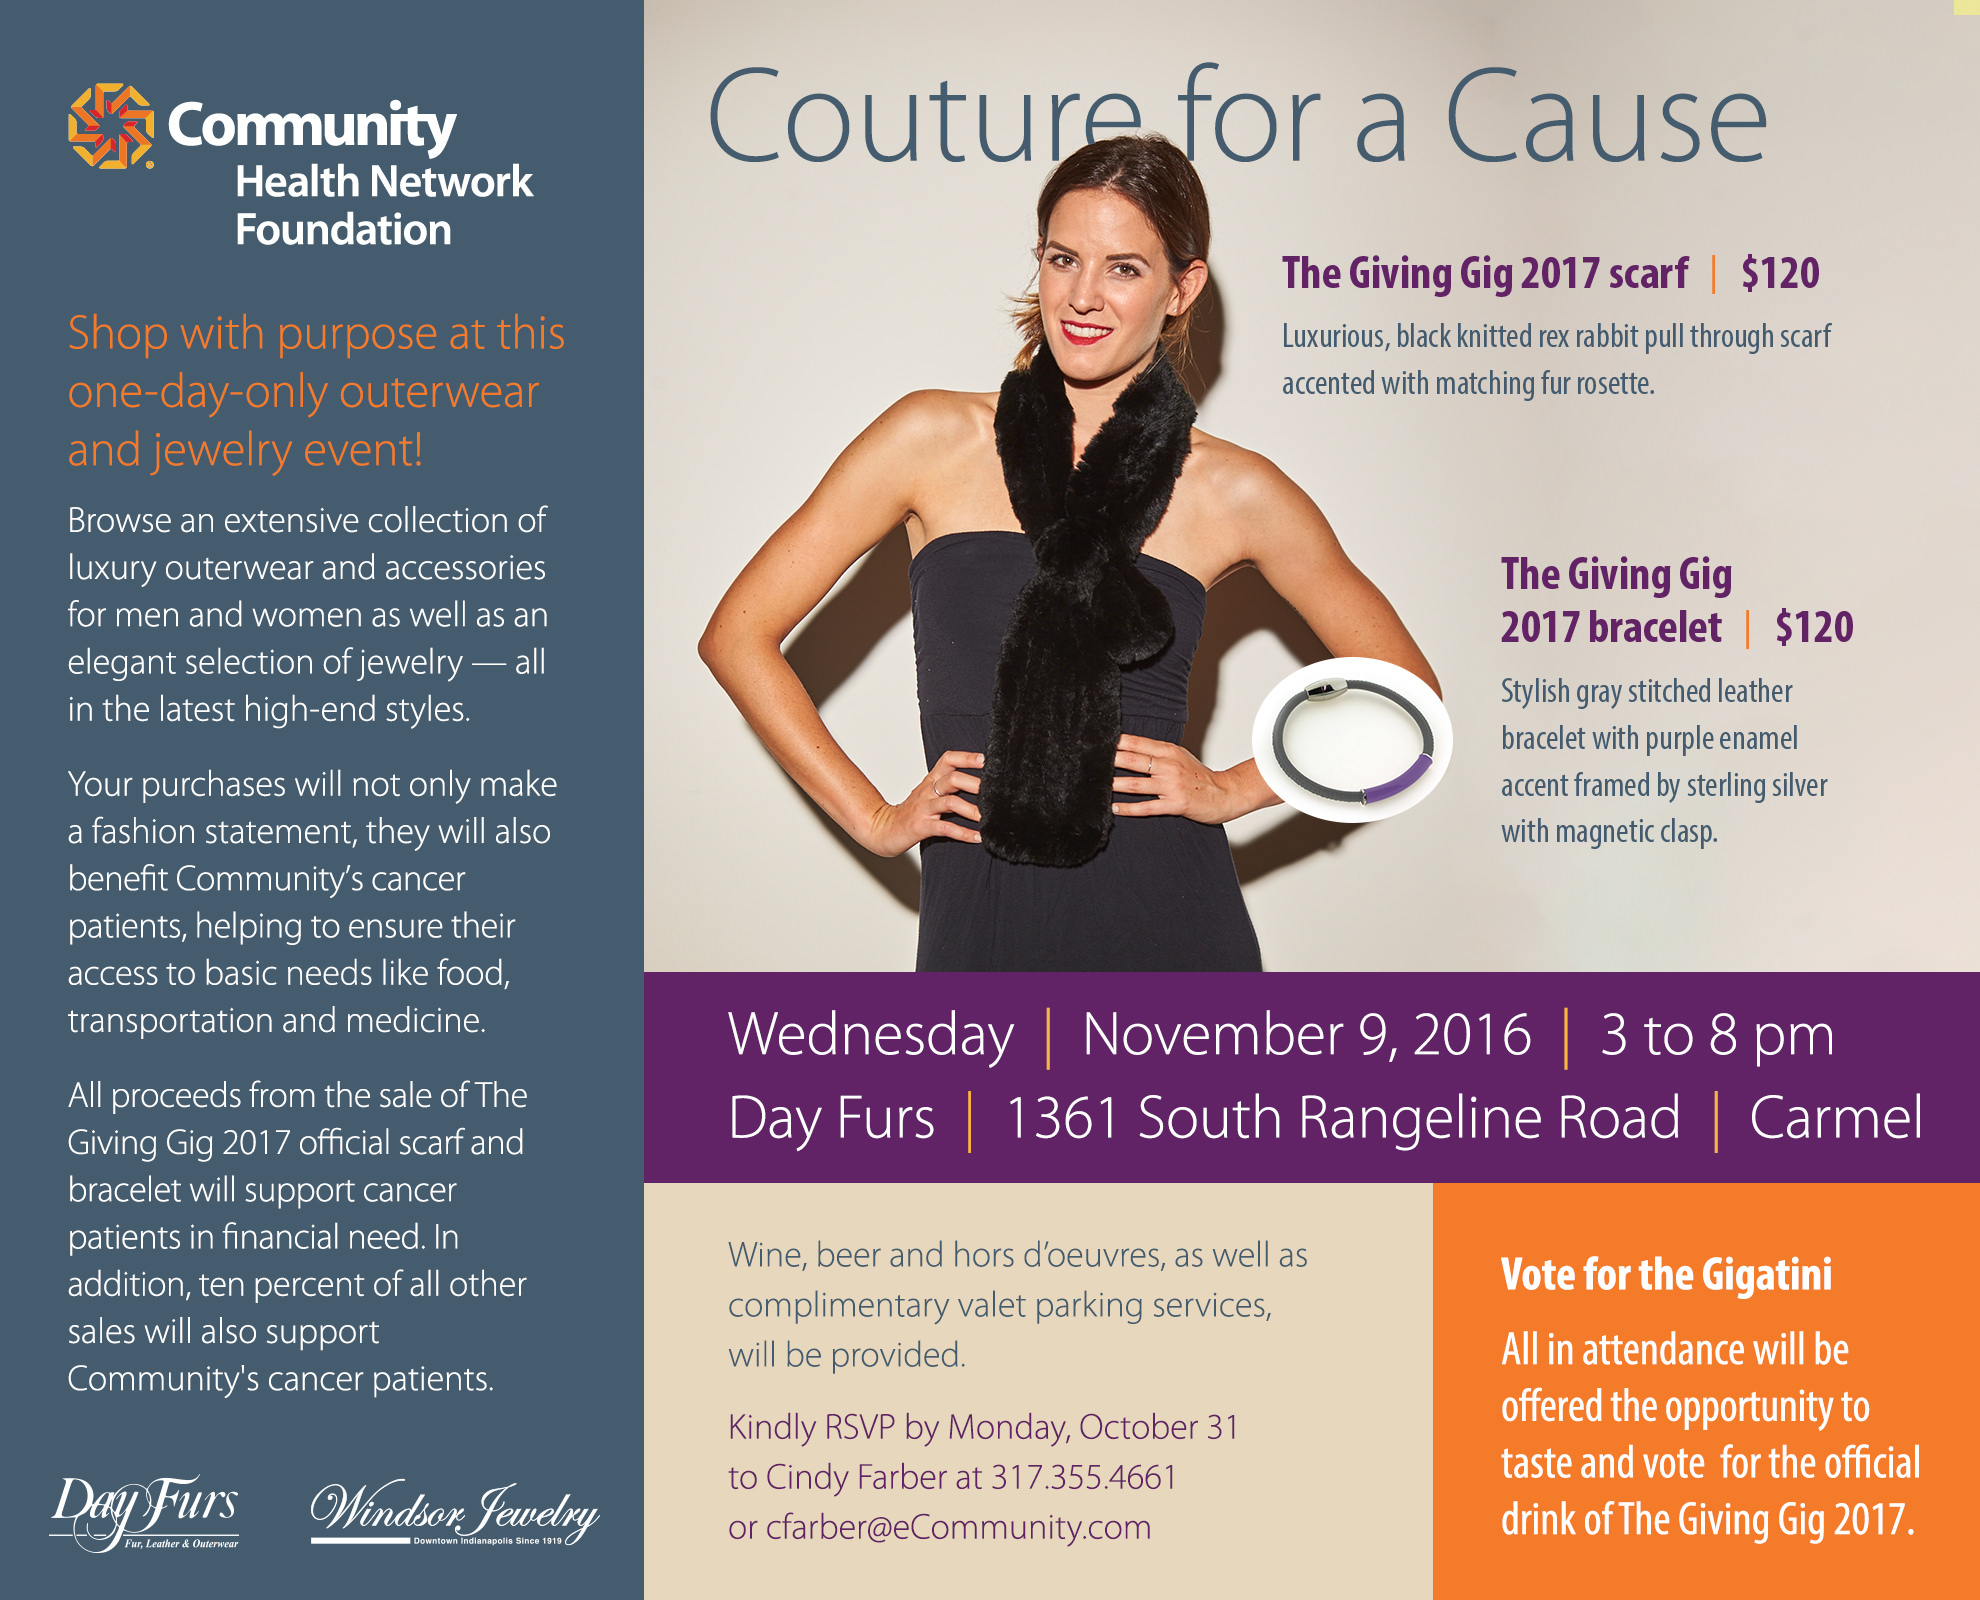 Day-furs-event-community-health-network-giving-gig-couture